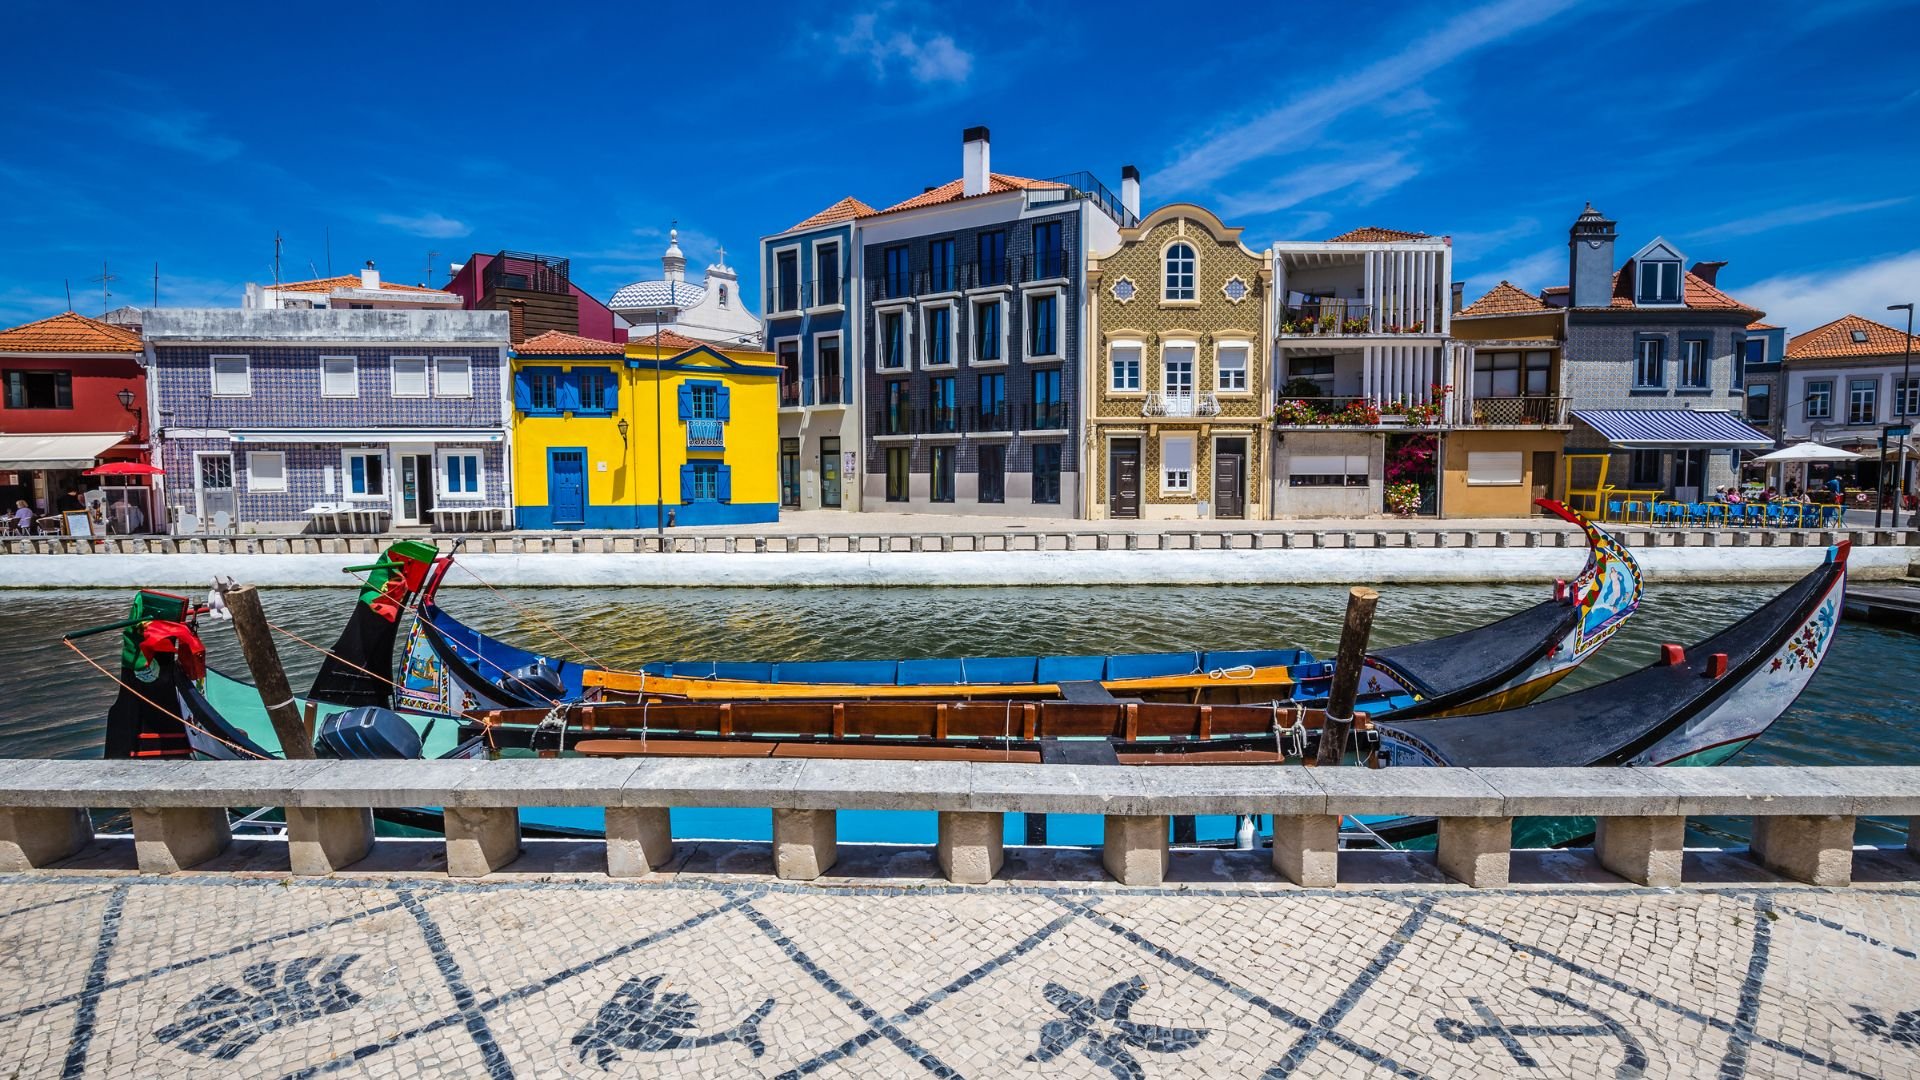 Image of Aveiro's Art Nouveau Route, featuring ornate Art Nouveau architecture and decorative details along the picturesque streets of Aveiro, Portugal